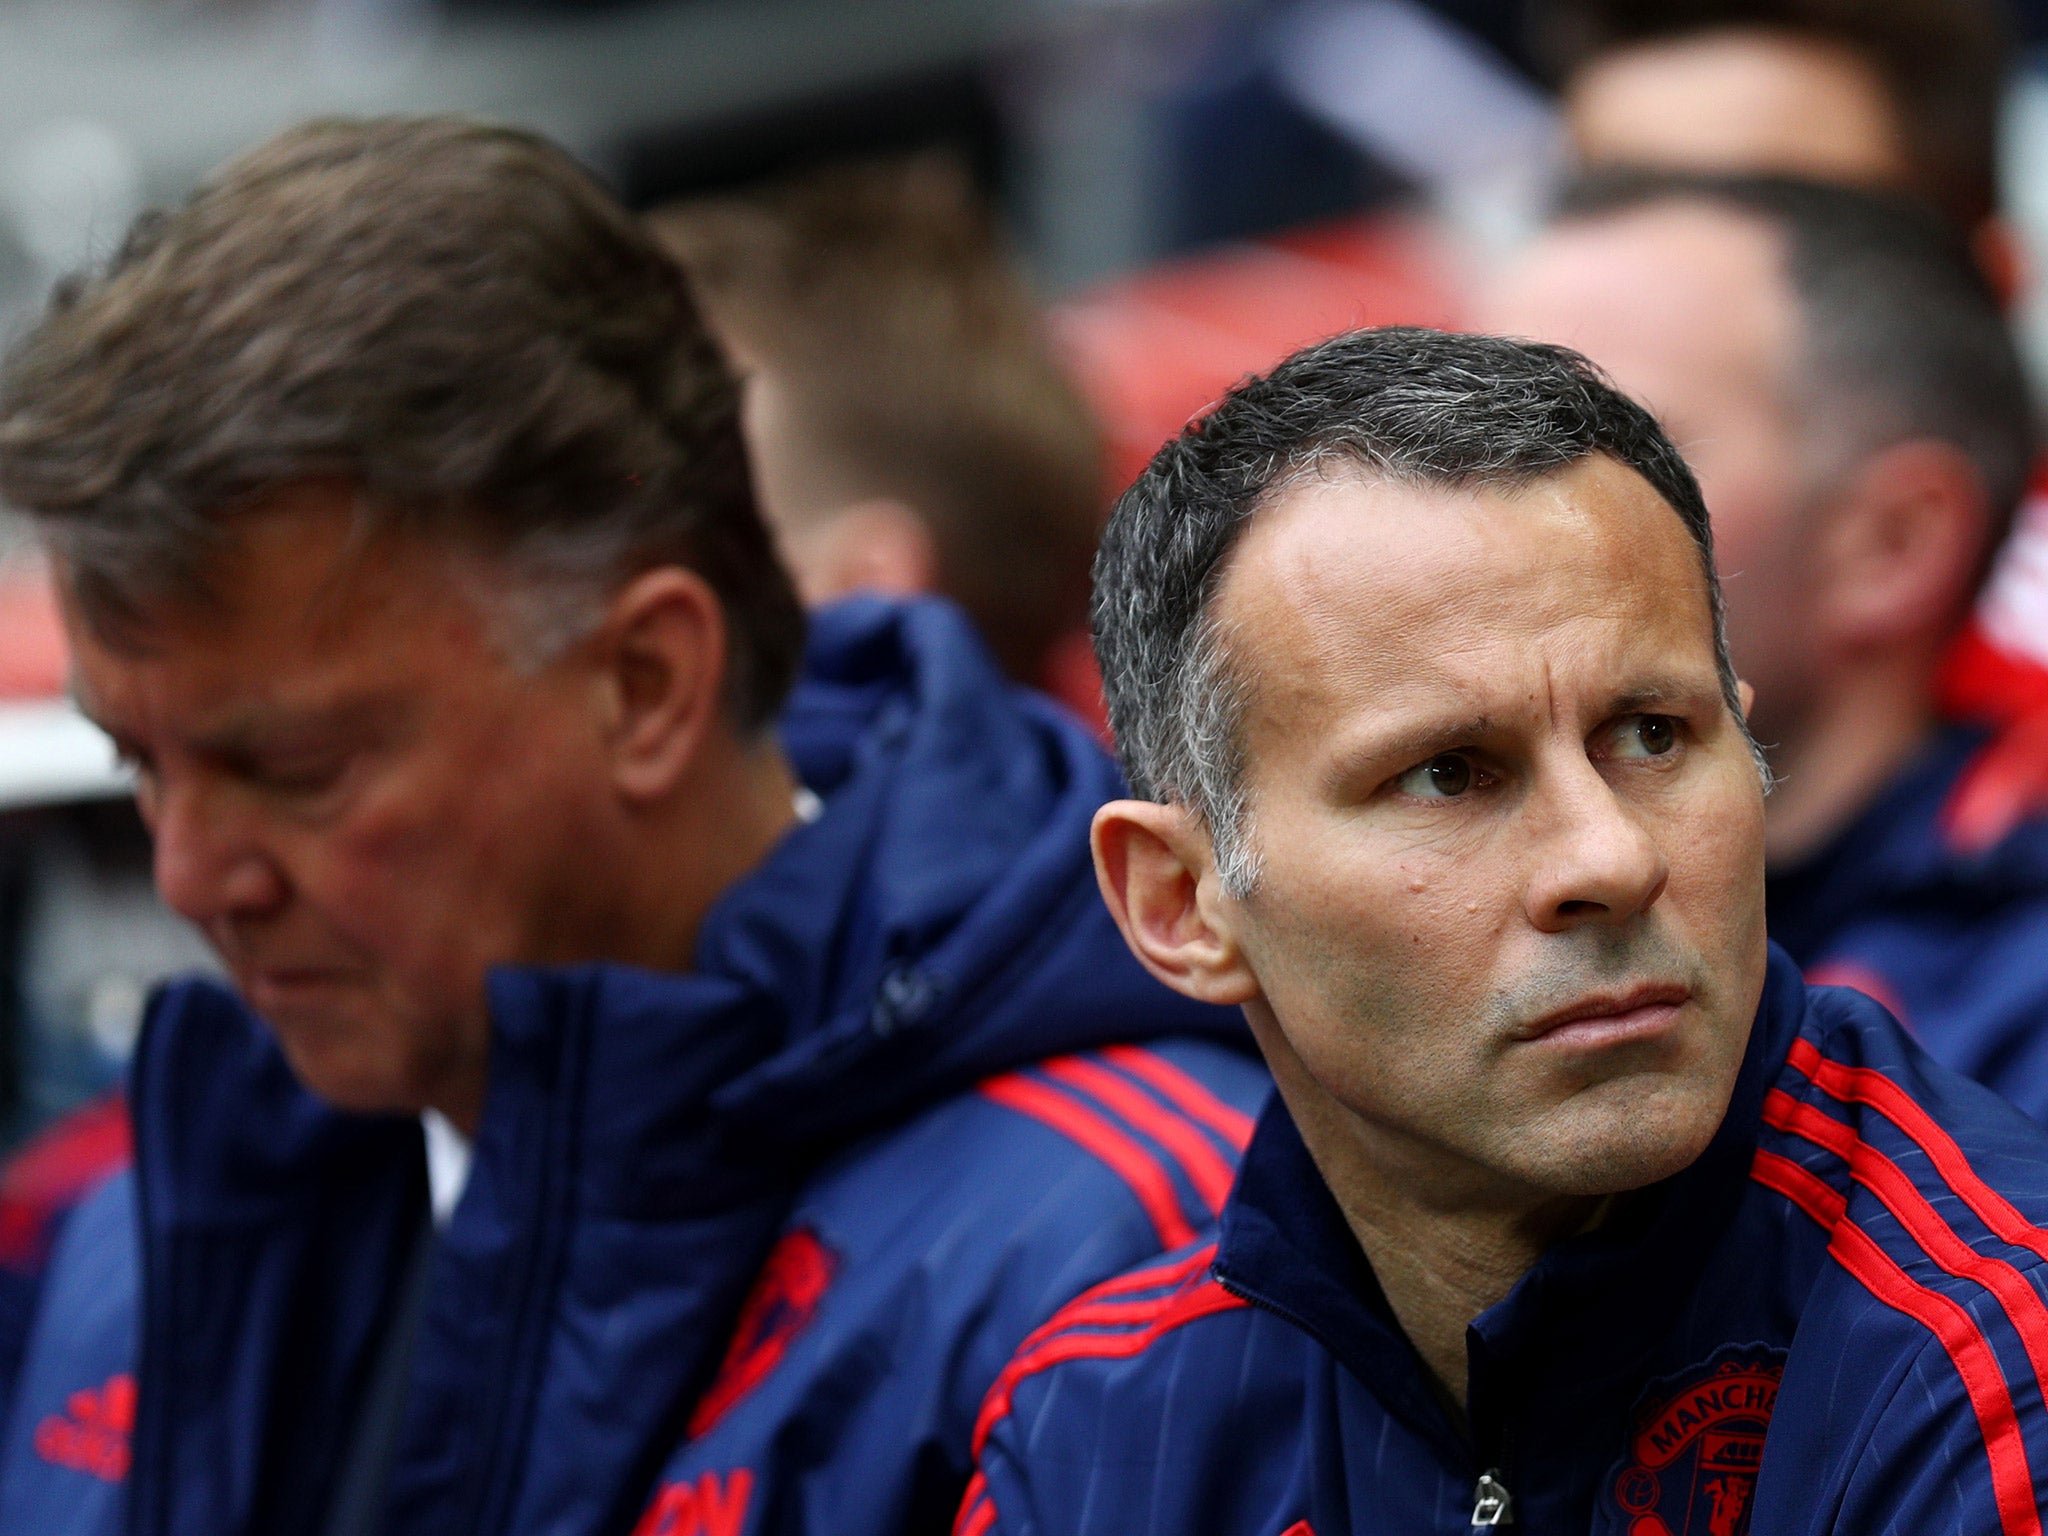 Ryan Giggs is reported to be on the verge of leaving Manchester United